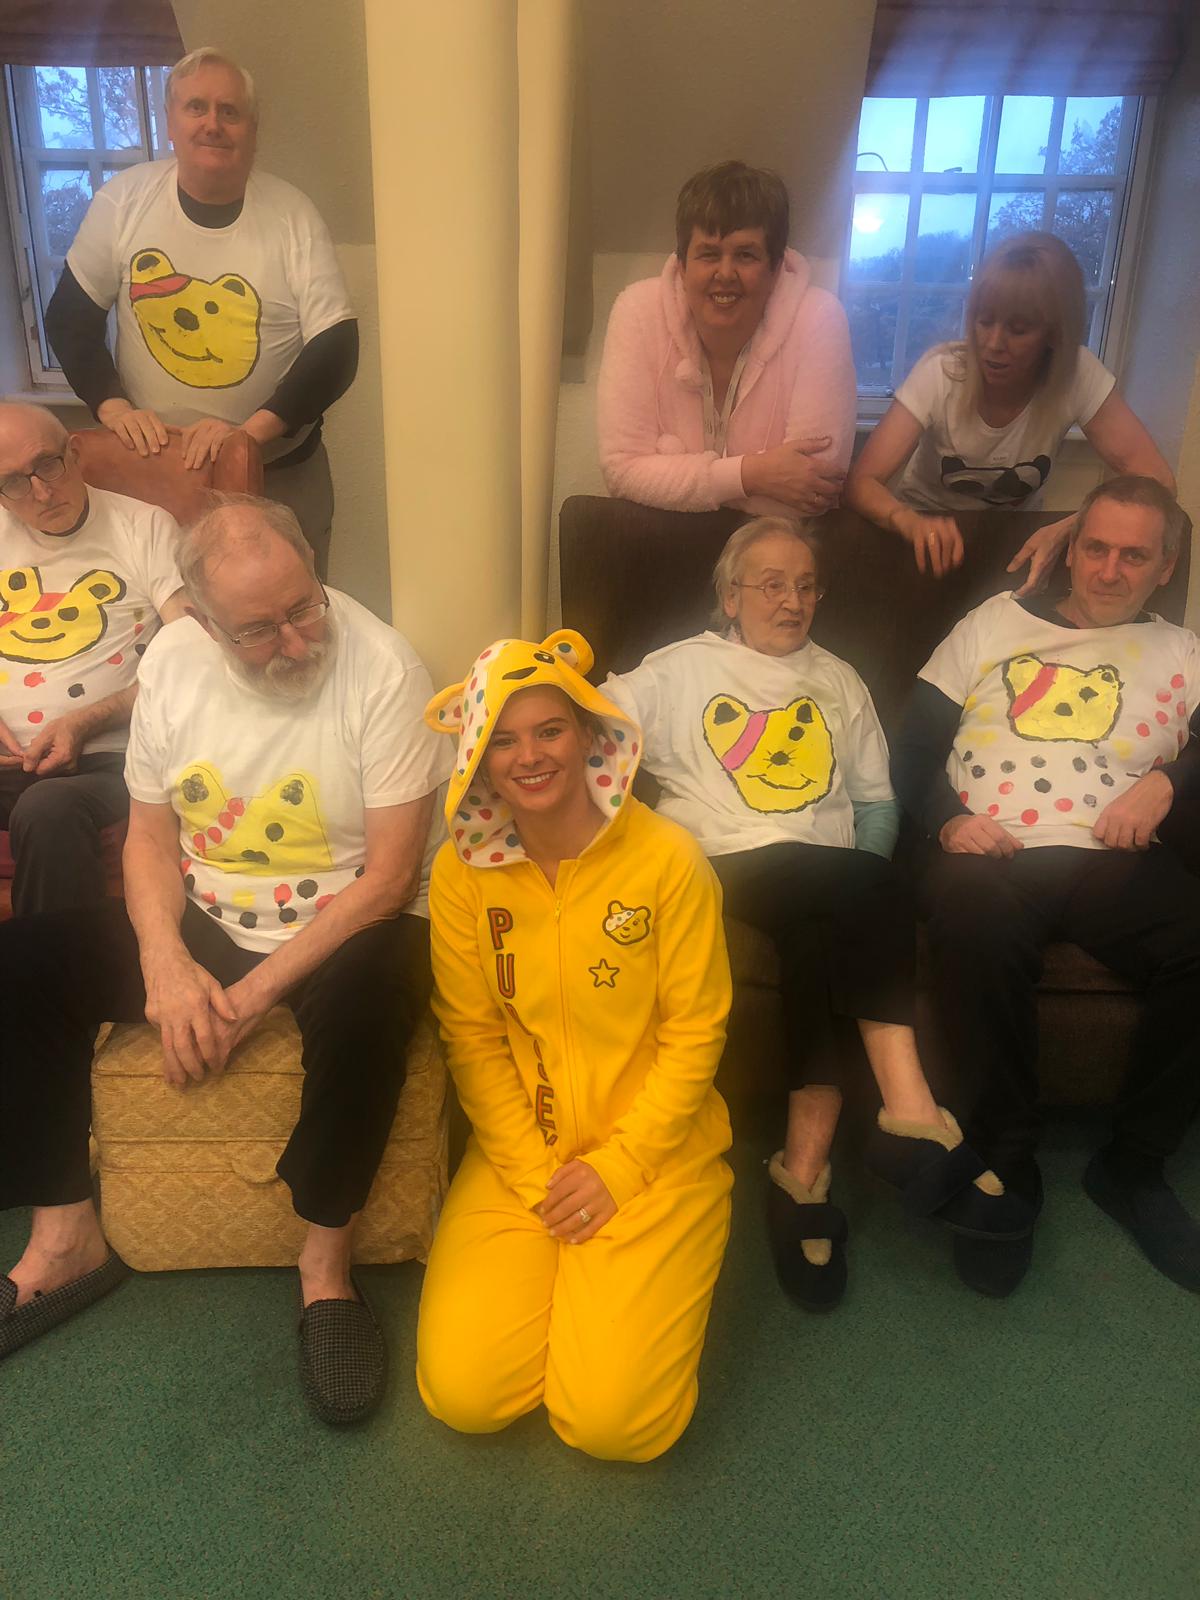 Children In Need 3: Key Healthcare is dedicated to caring for elderly residents in safe. We have multiple dementia care homes including our care home middlesbrough, our care home St. Helen and care home saltburn. We excel in monitoring and improving care levels.